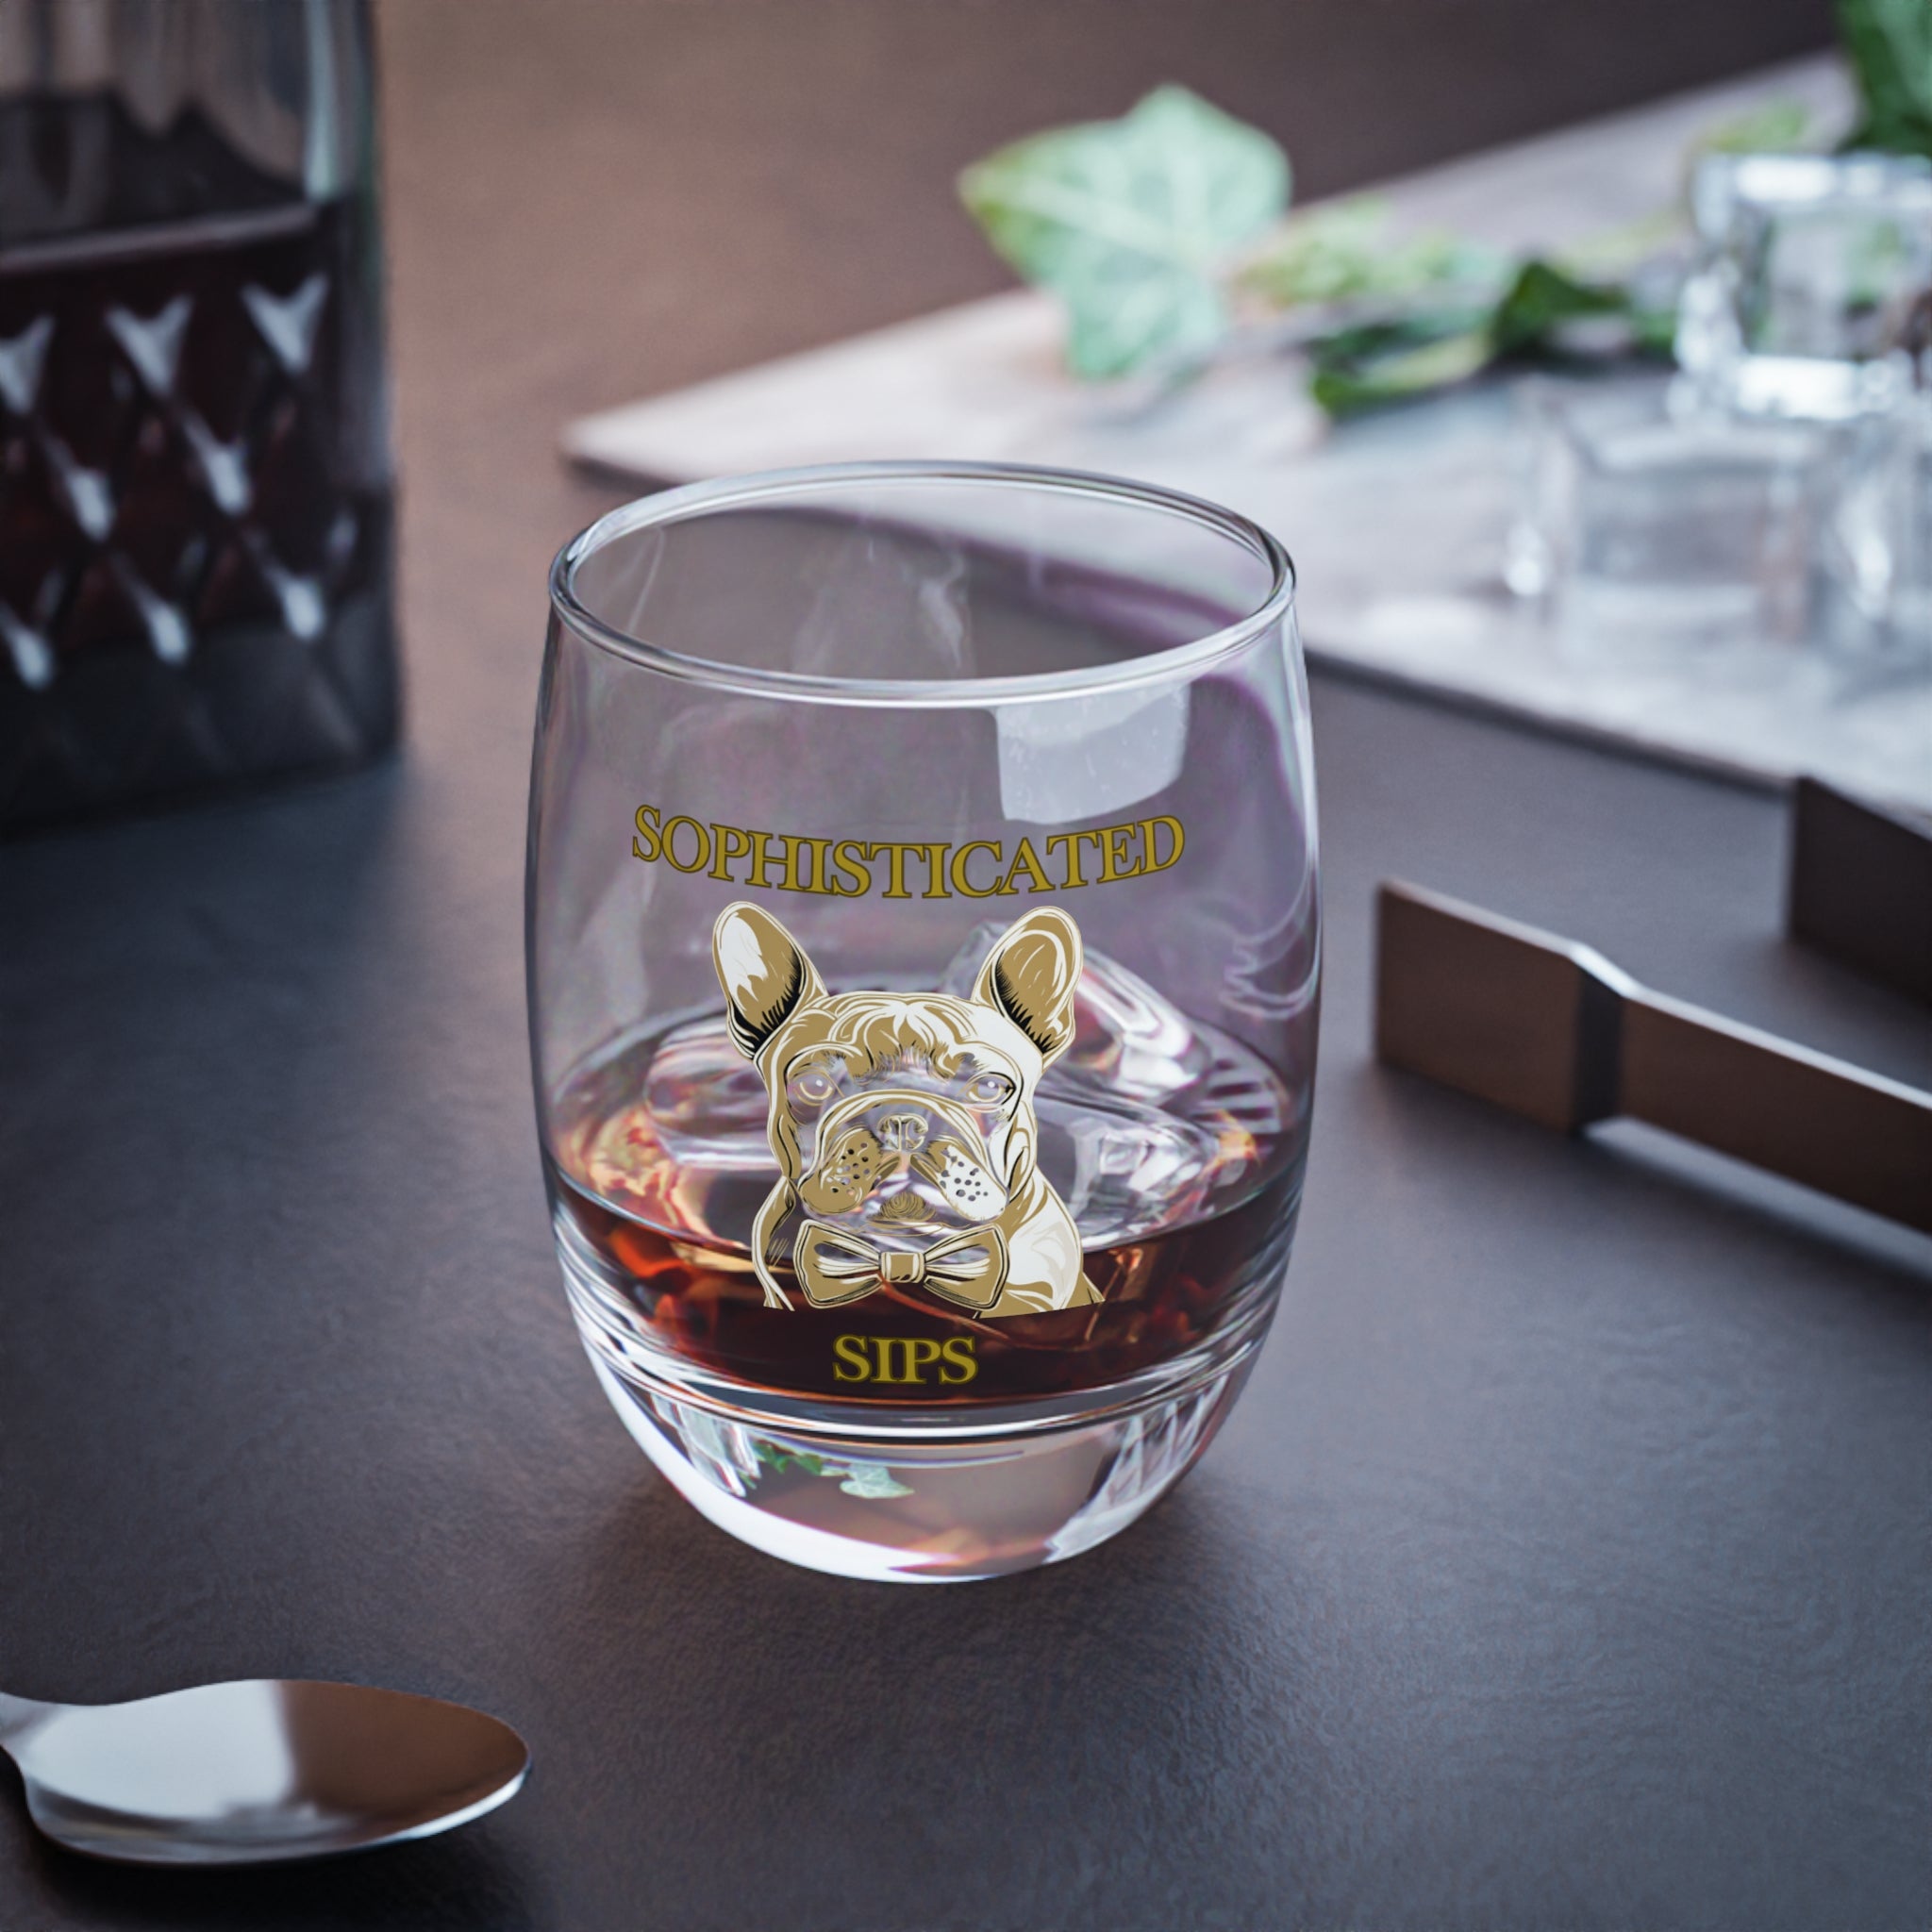 Tipsy Bully Sophisticated Sips Whiskey/Bourbon Glass (French)